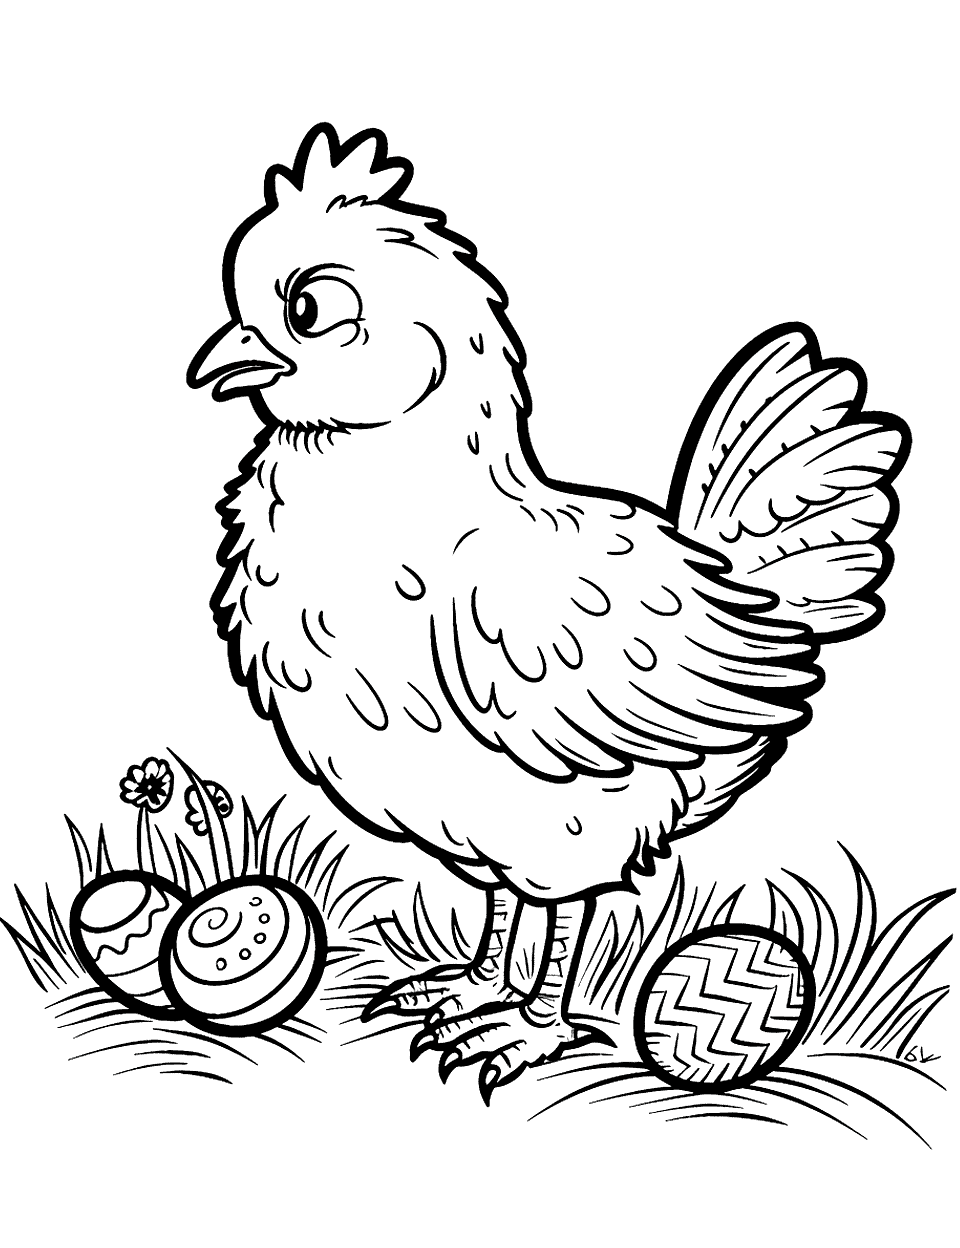 Easter Chicken with Eggs Coloring Page - A festive scene with a chicken beside a basket of beautifully decorated Easter eggs.